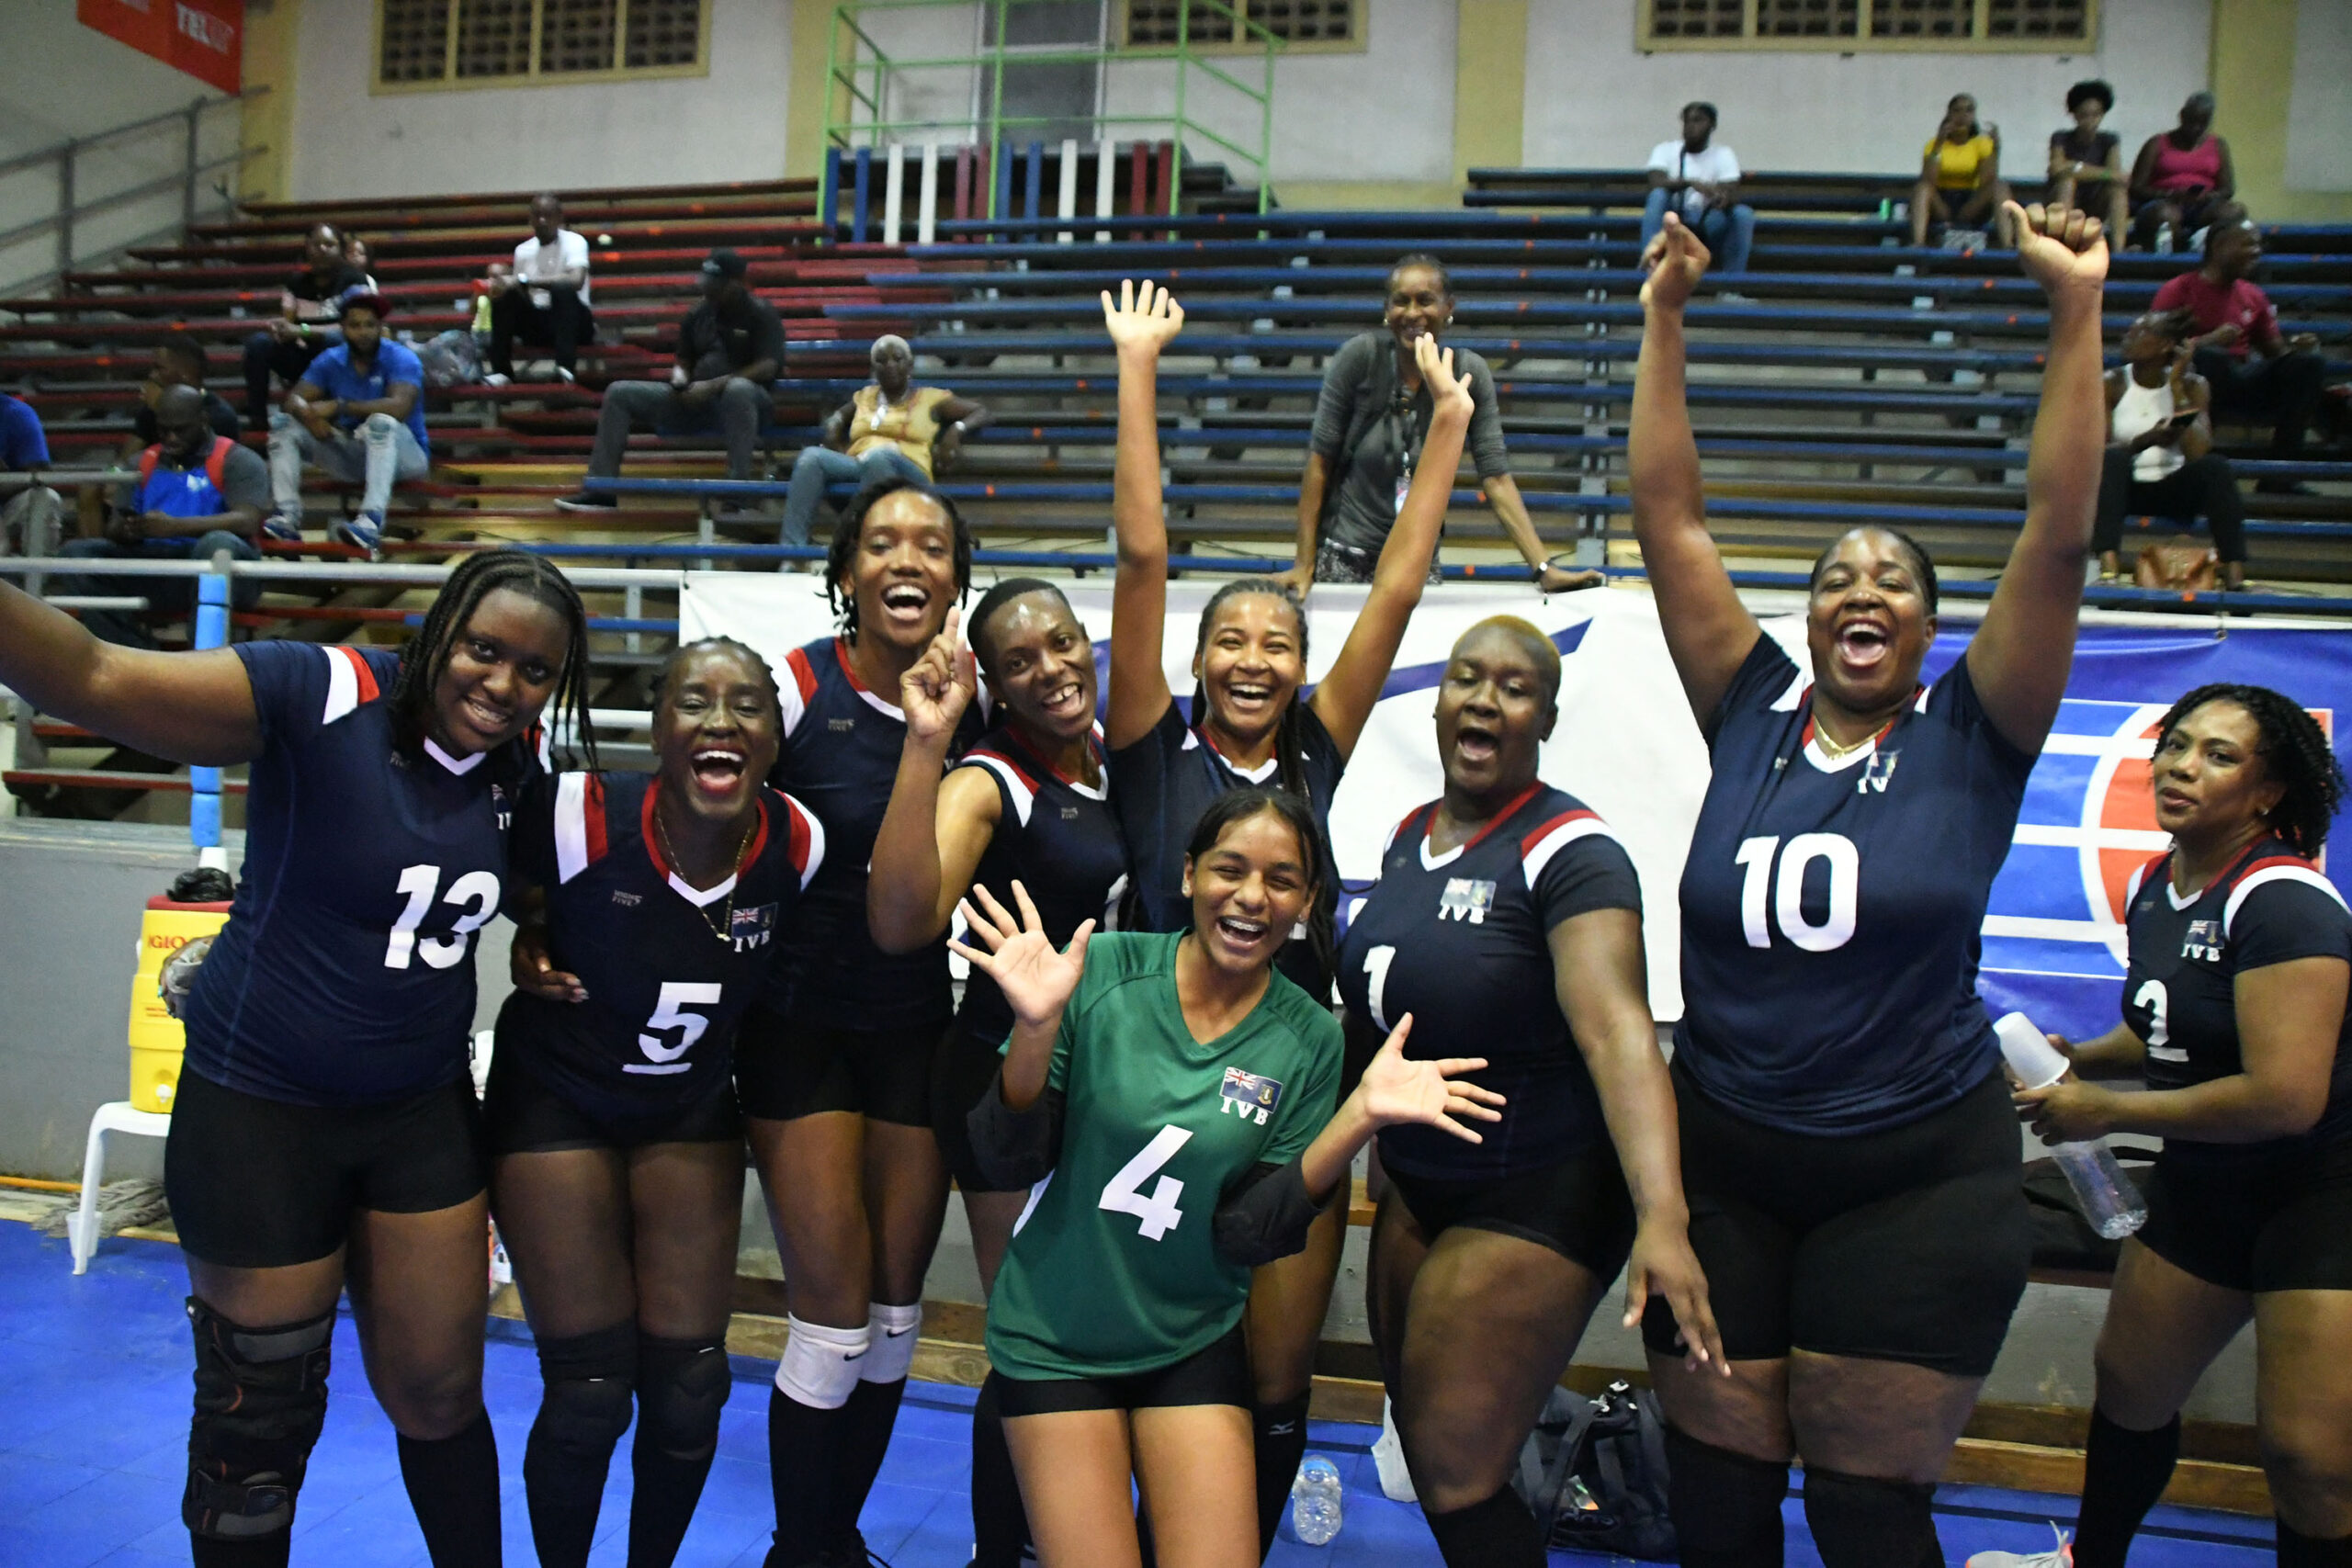 St. Lucia undefeated in ECVA pool play winning in straights over Antigua & Barbuda